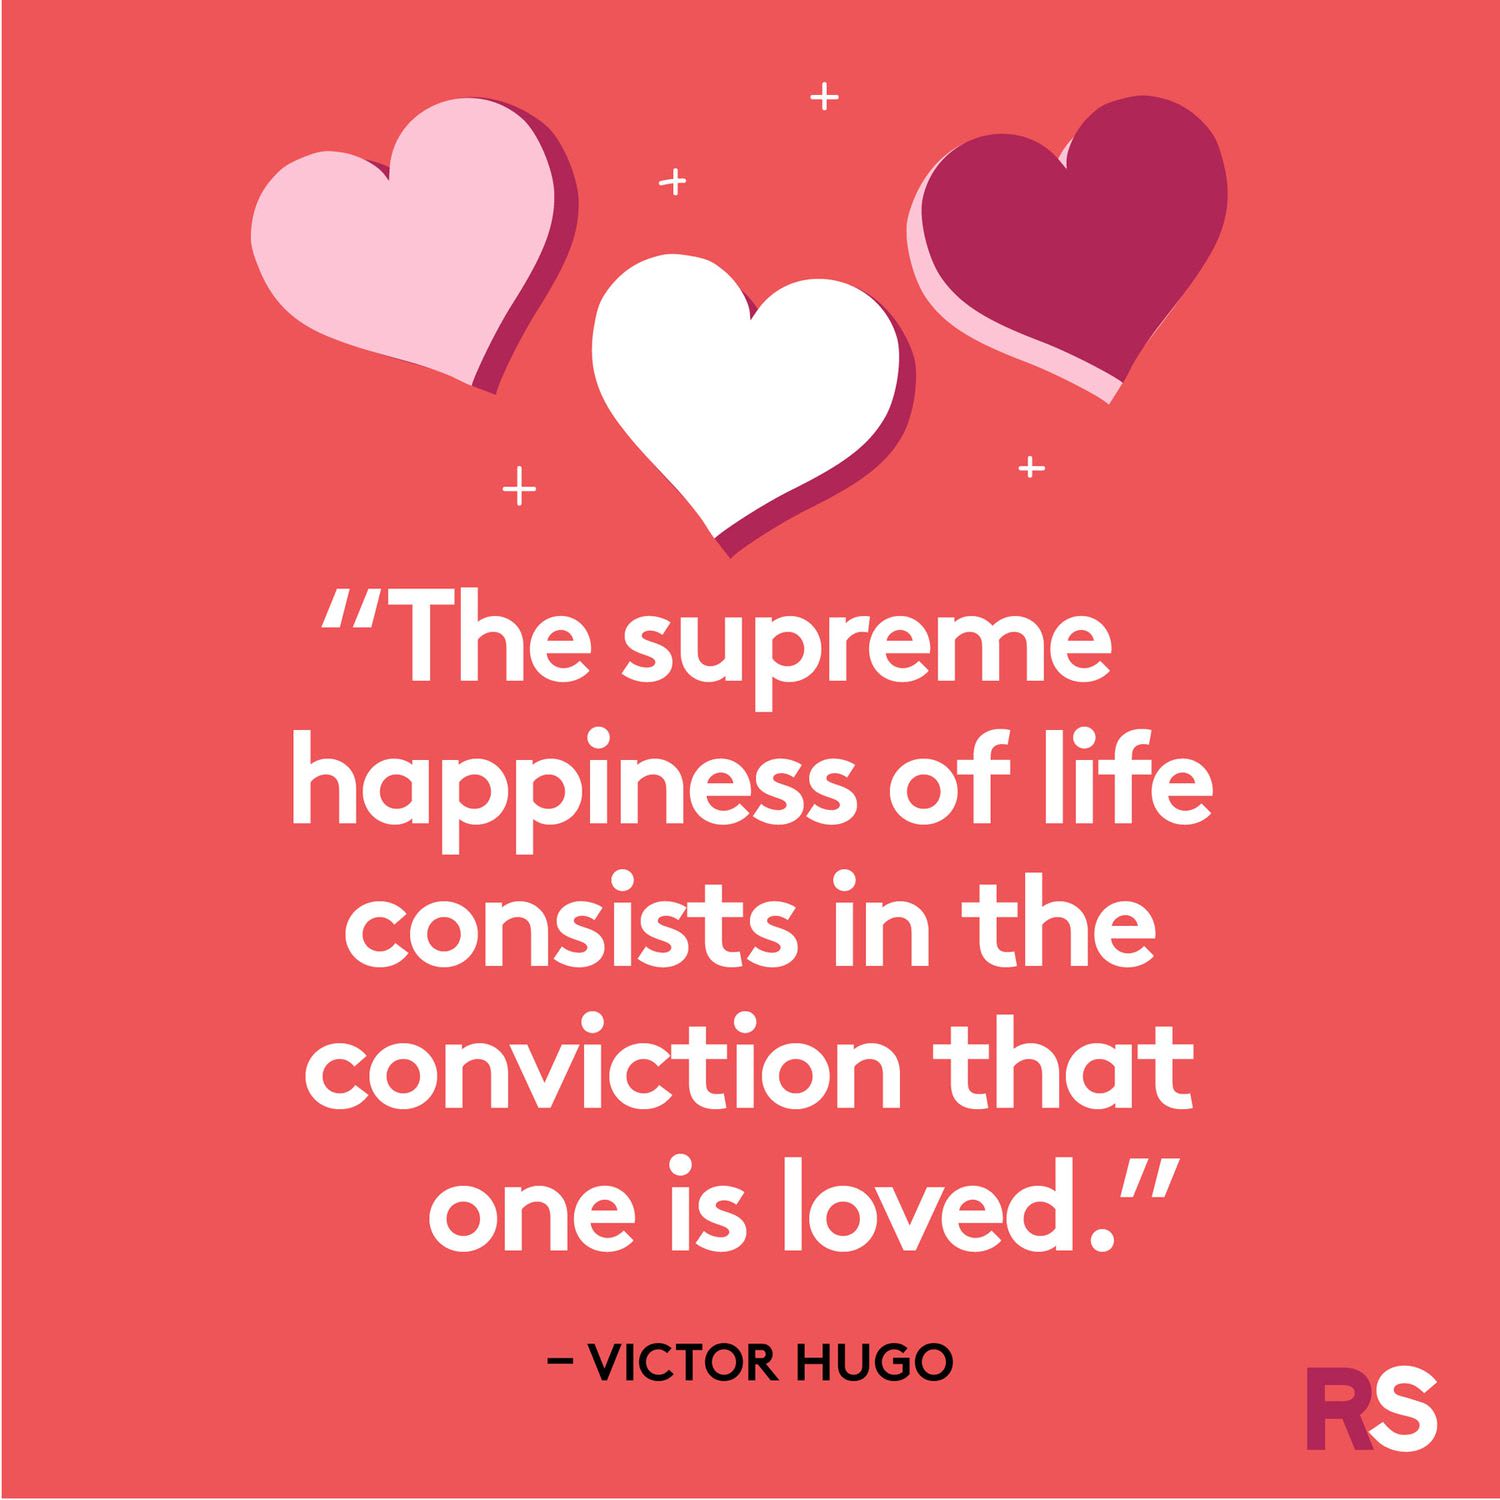 Love Quotes: 40 of the Best Quotes About Love for Valentine's Day